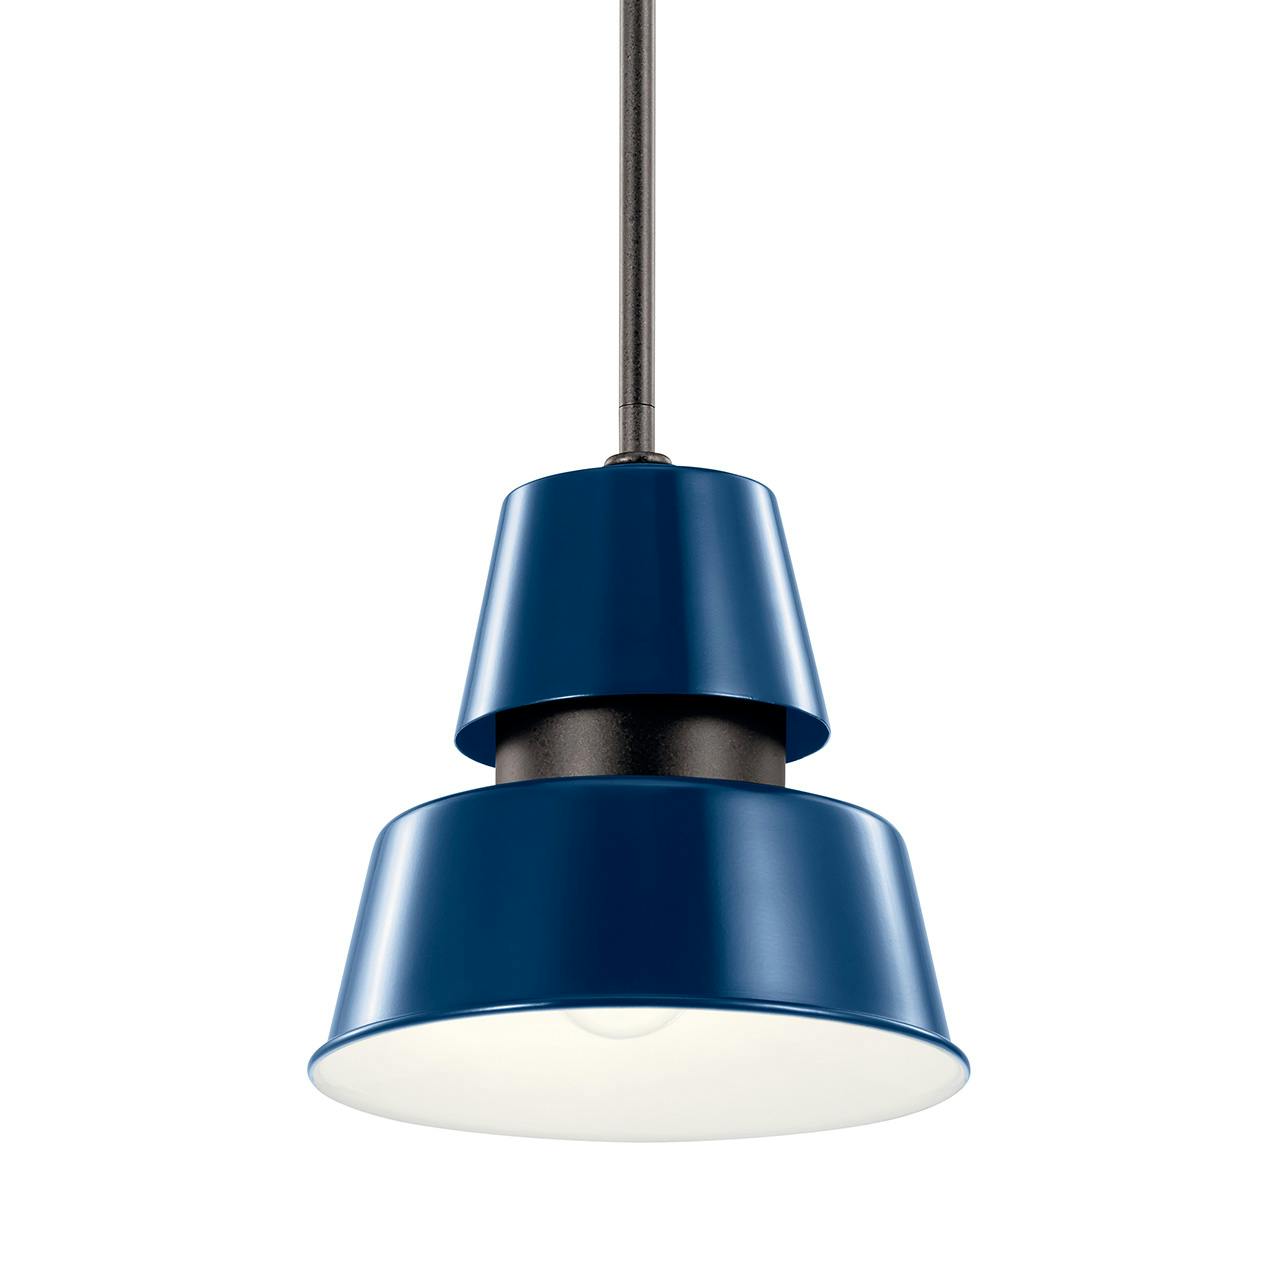 Lozano 9.5" 1 Light Pendant Catalina Blue without the canopy on a white background